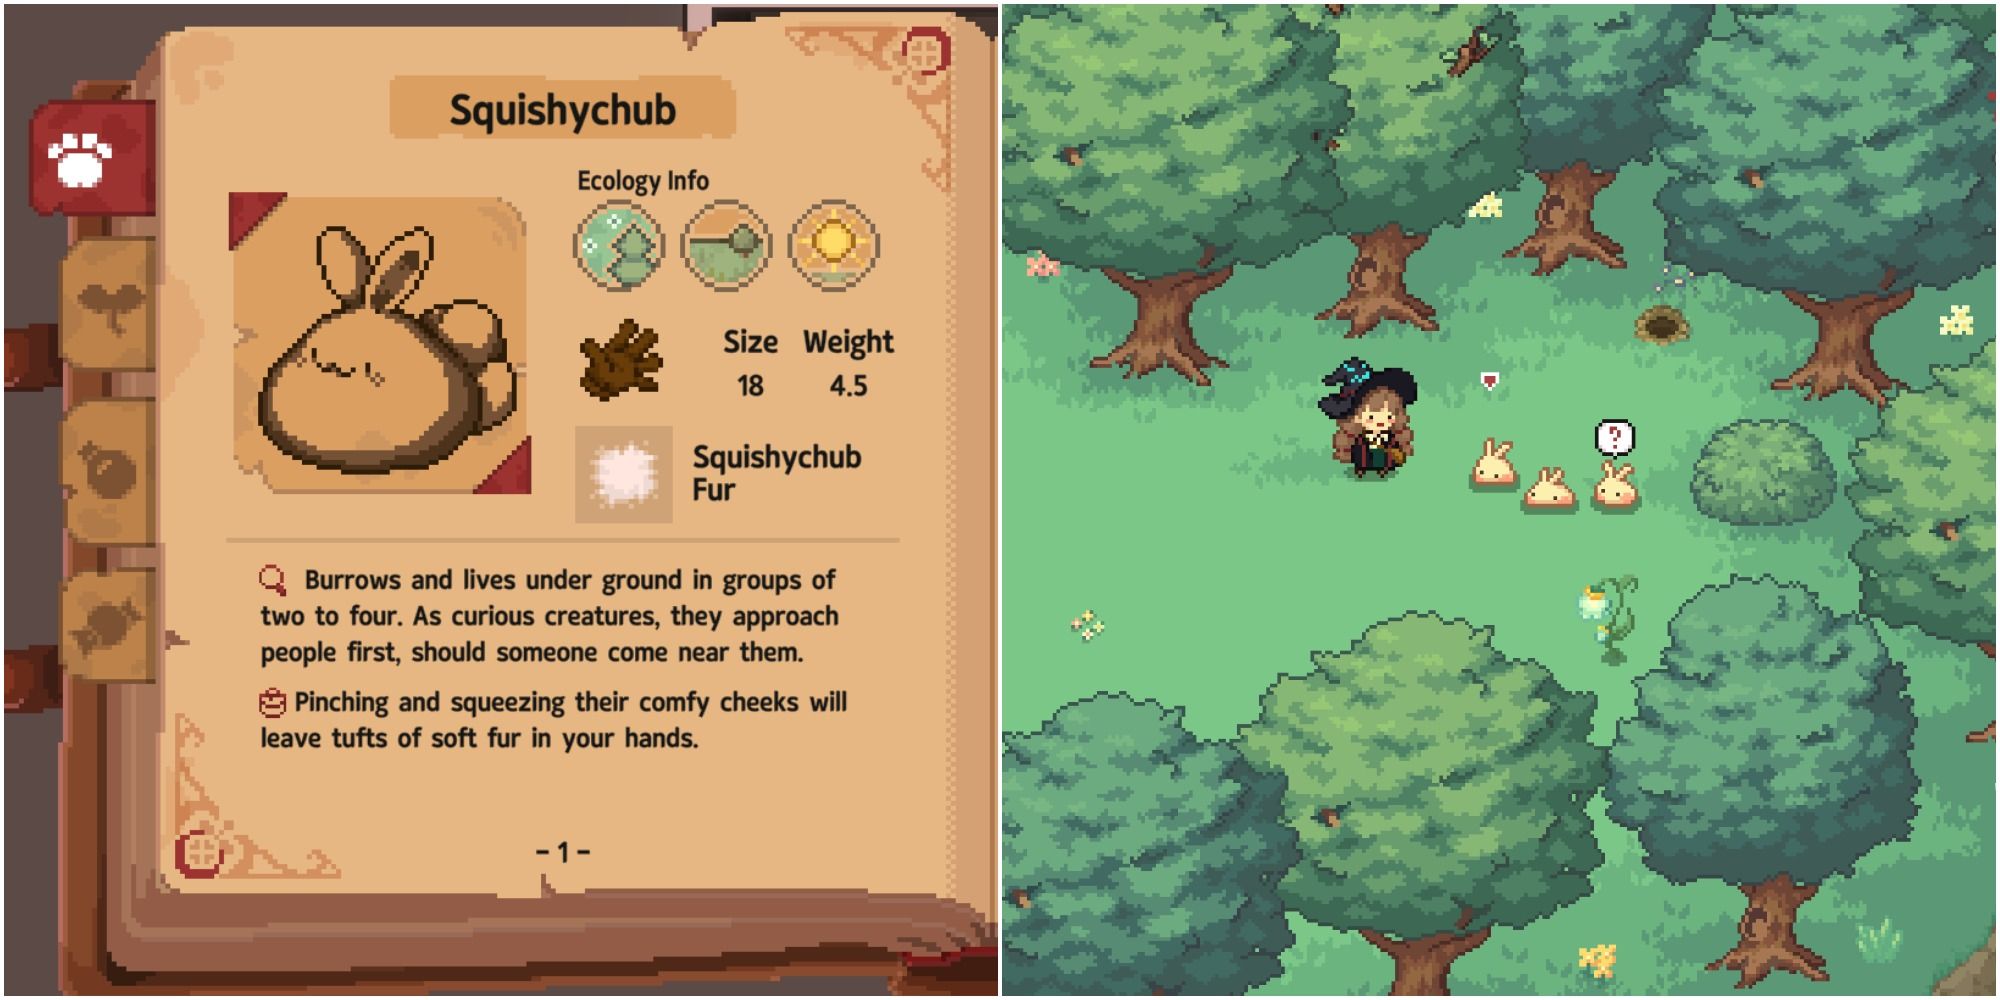 Split image of Squishychub journal entry and Ellie standing in woods beside three Squishychubs